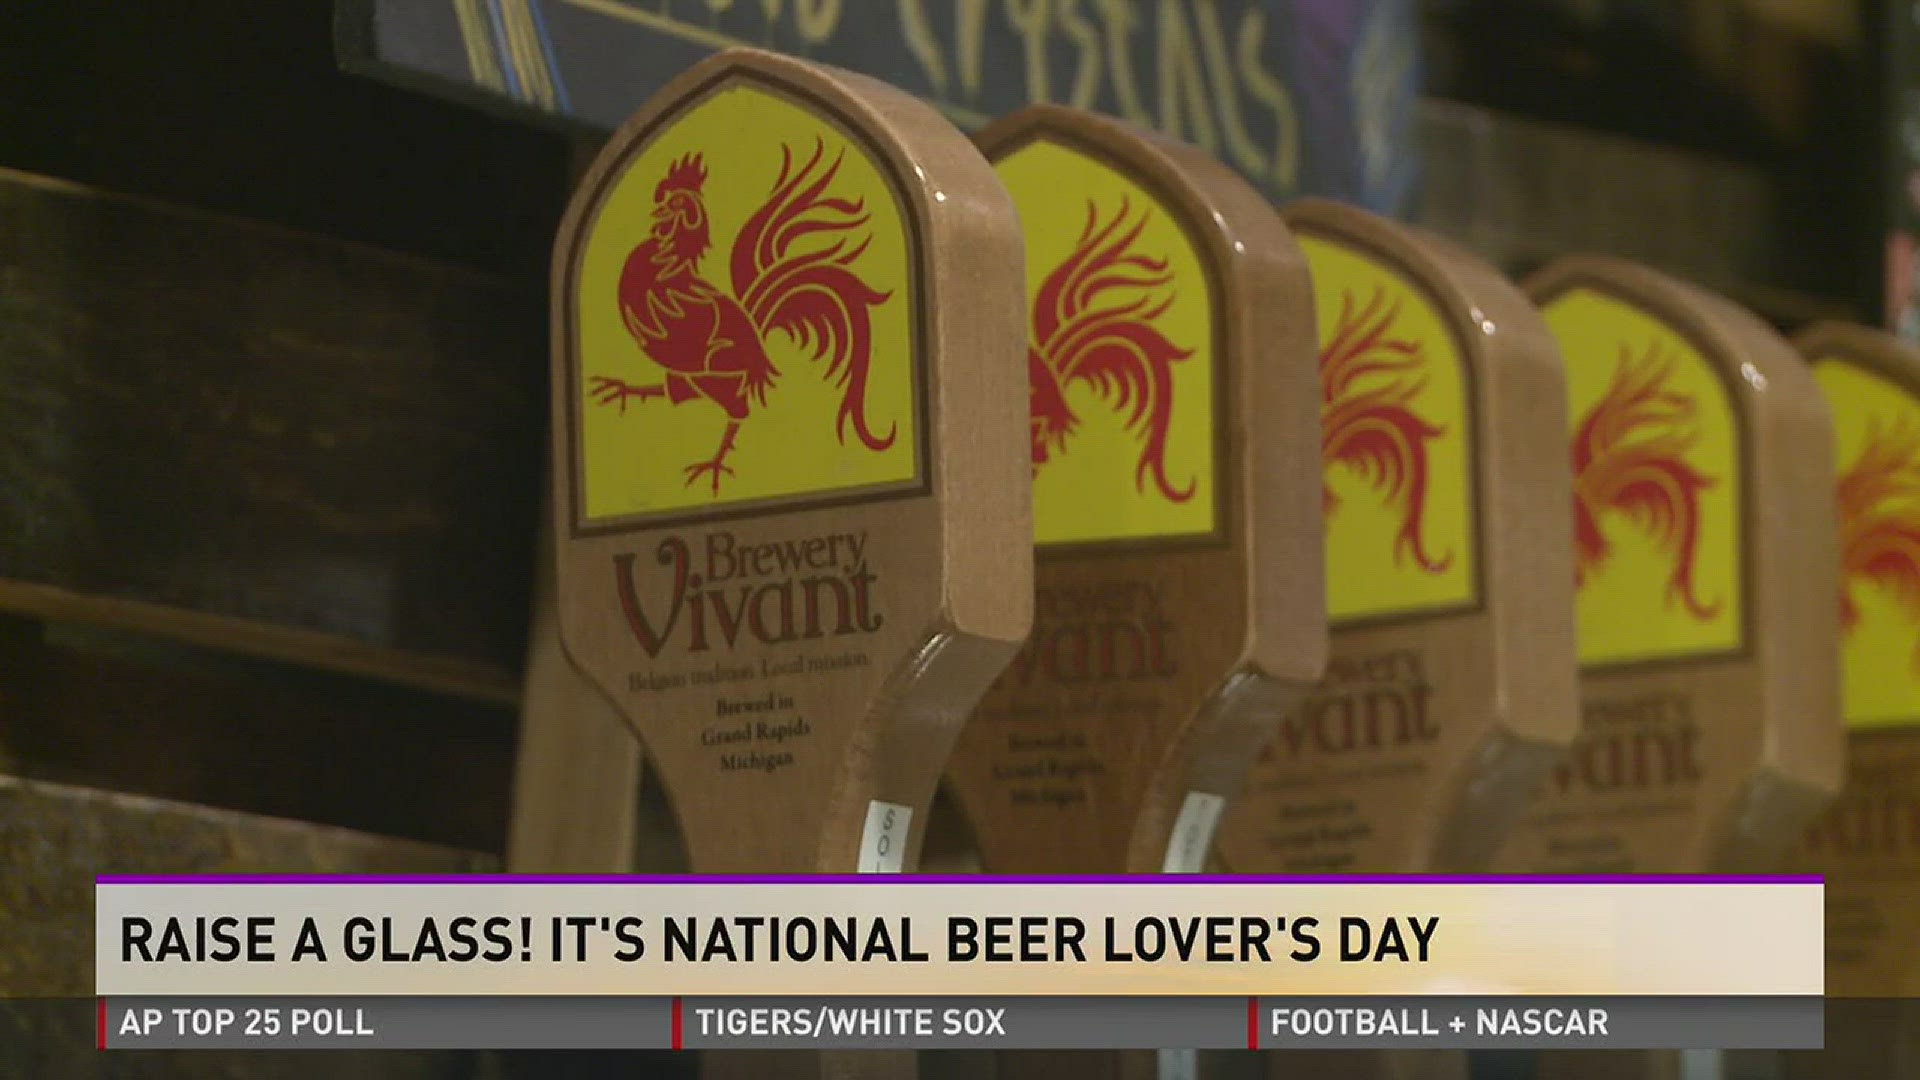 We talk about some of the deals you can score on National Beer Lover's Day, which falls on Wednesday, Sept. 7, 2016.